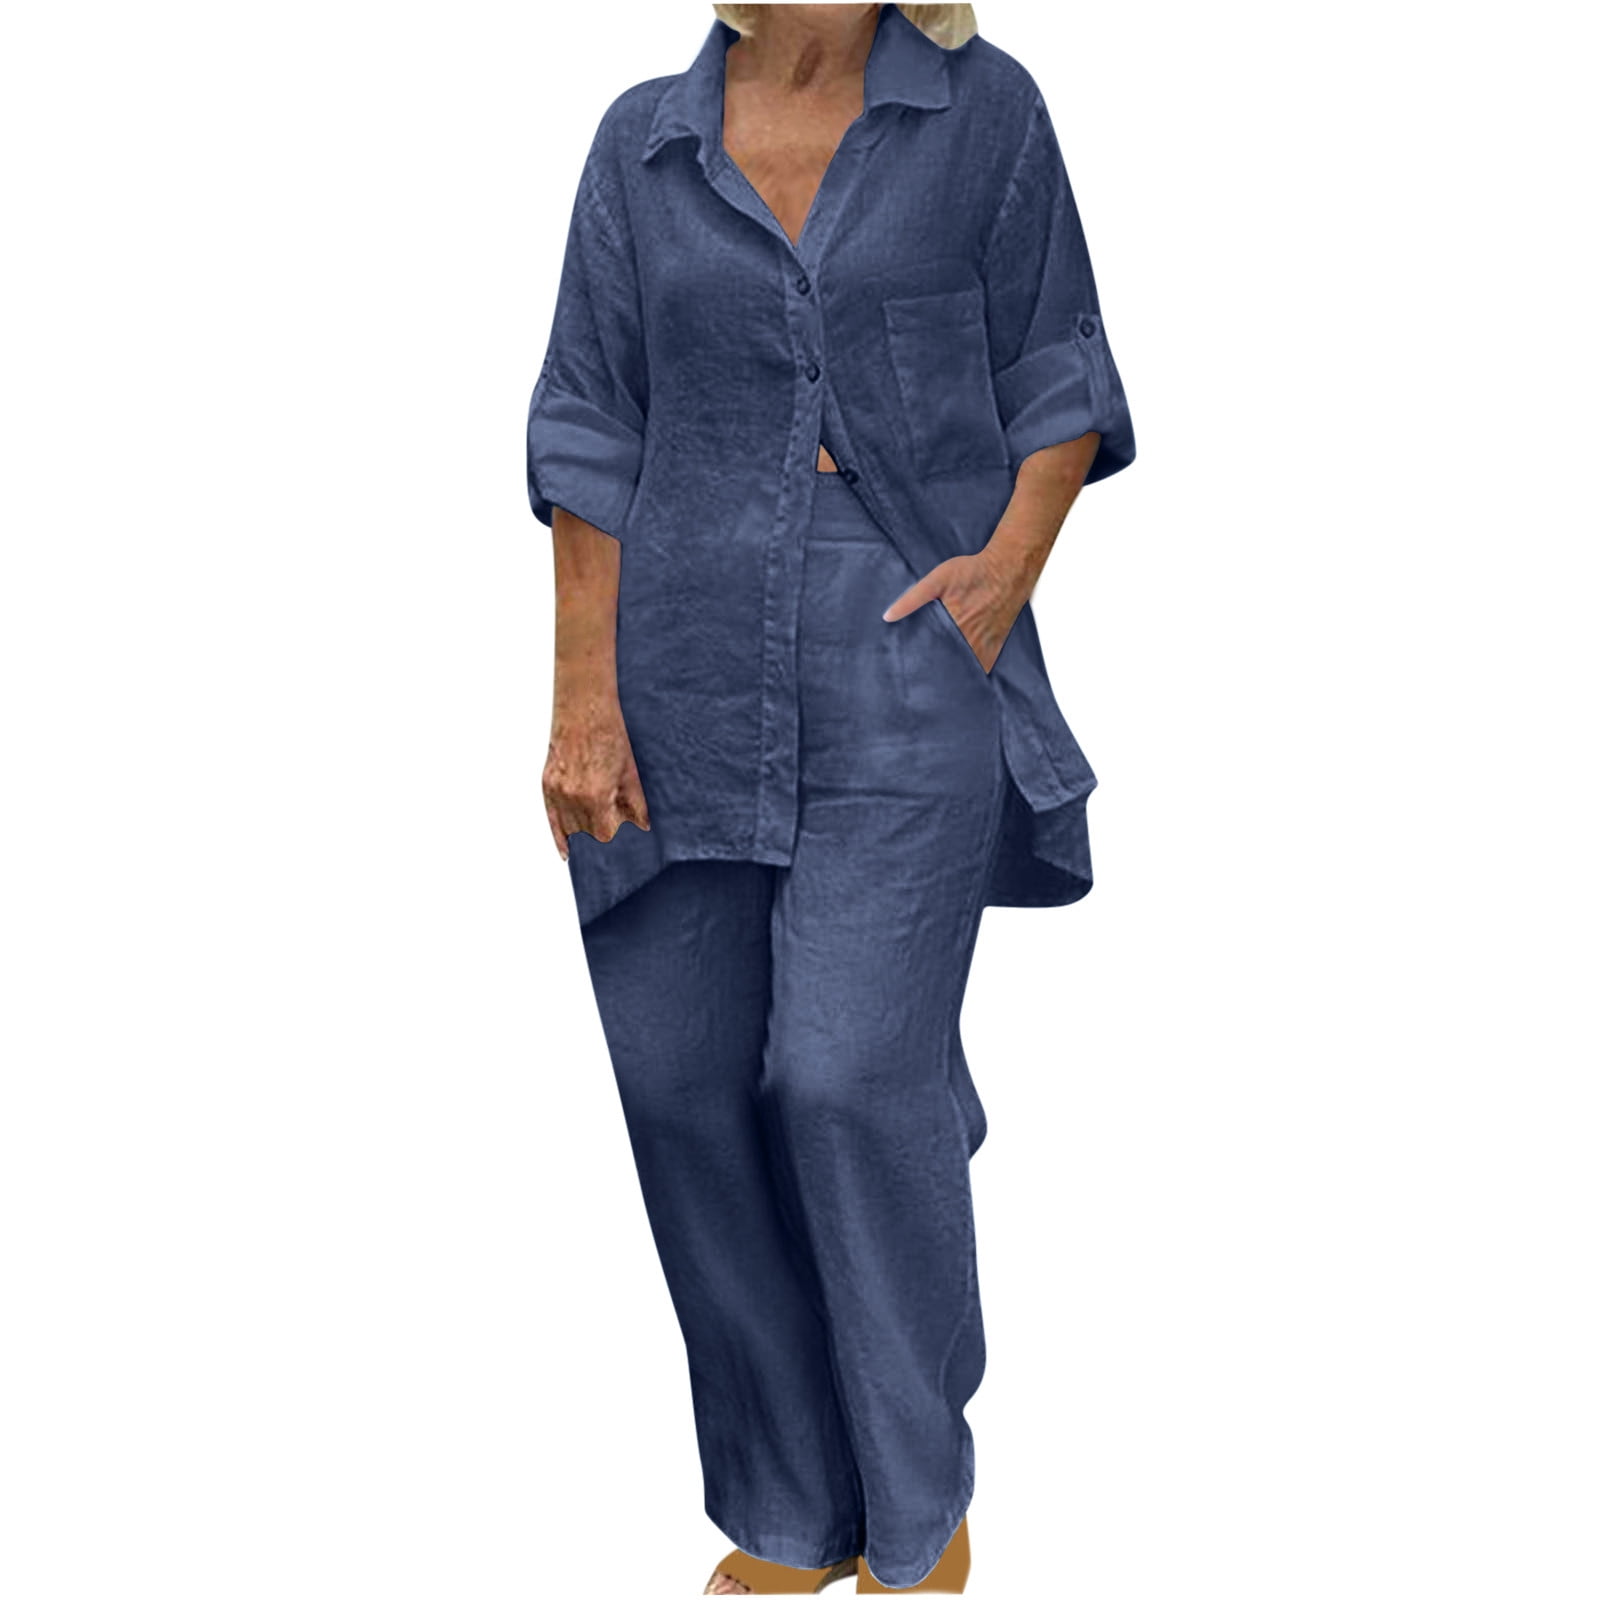 Women Linen Suit Two Piece Outfits Rolled Sleeve V Neck Button Down Shirt and Pants Set Loungewear with Pockets 9b86ef8e bdd3 43f0 802e 65f9648cb2af.42fe08817417de57c430125fded32855